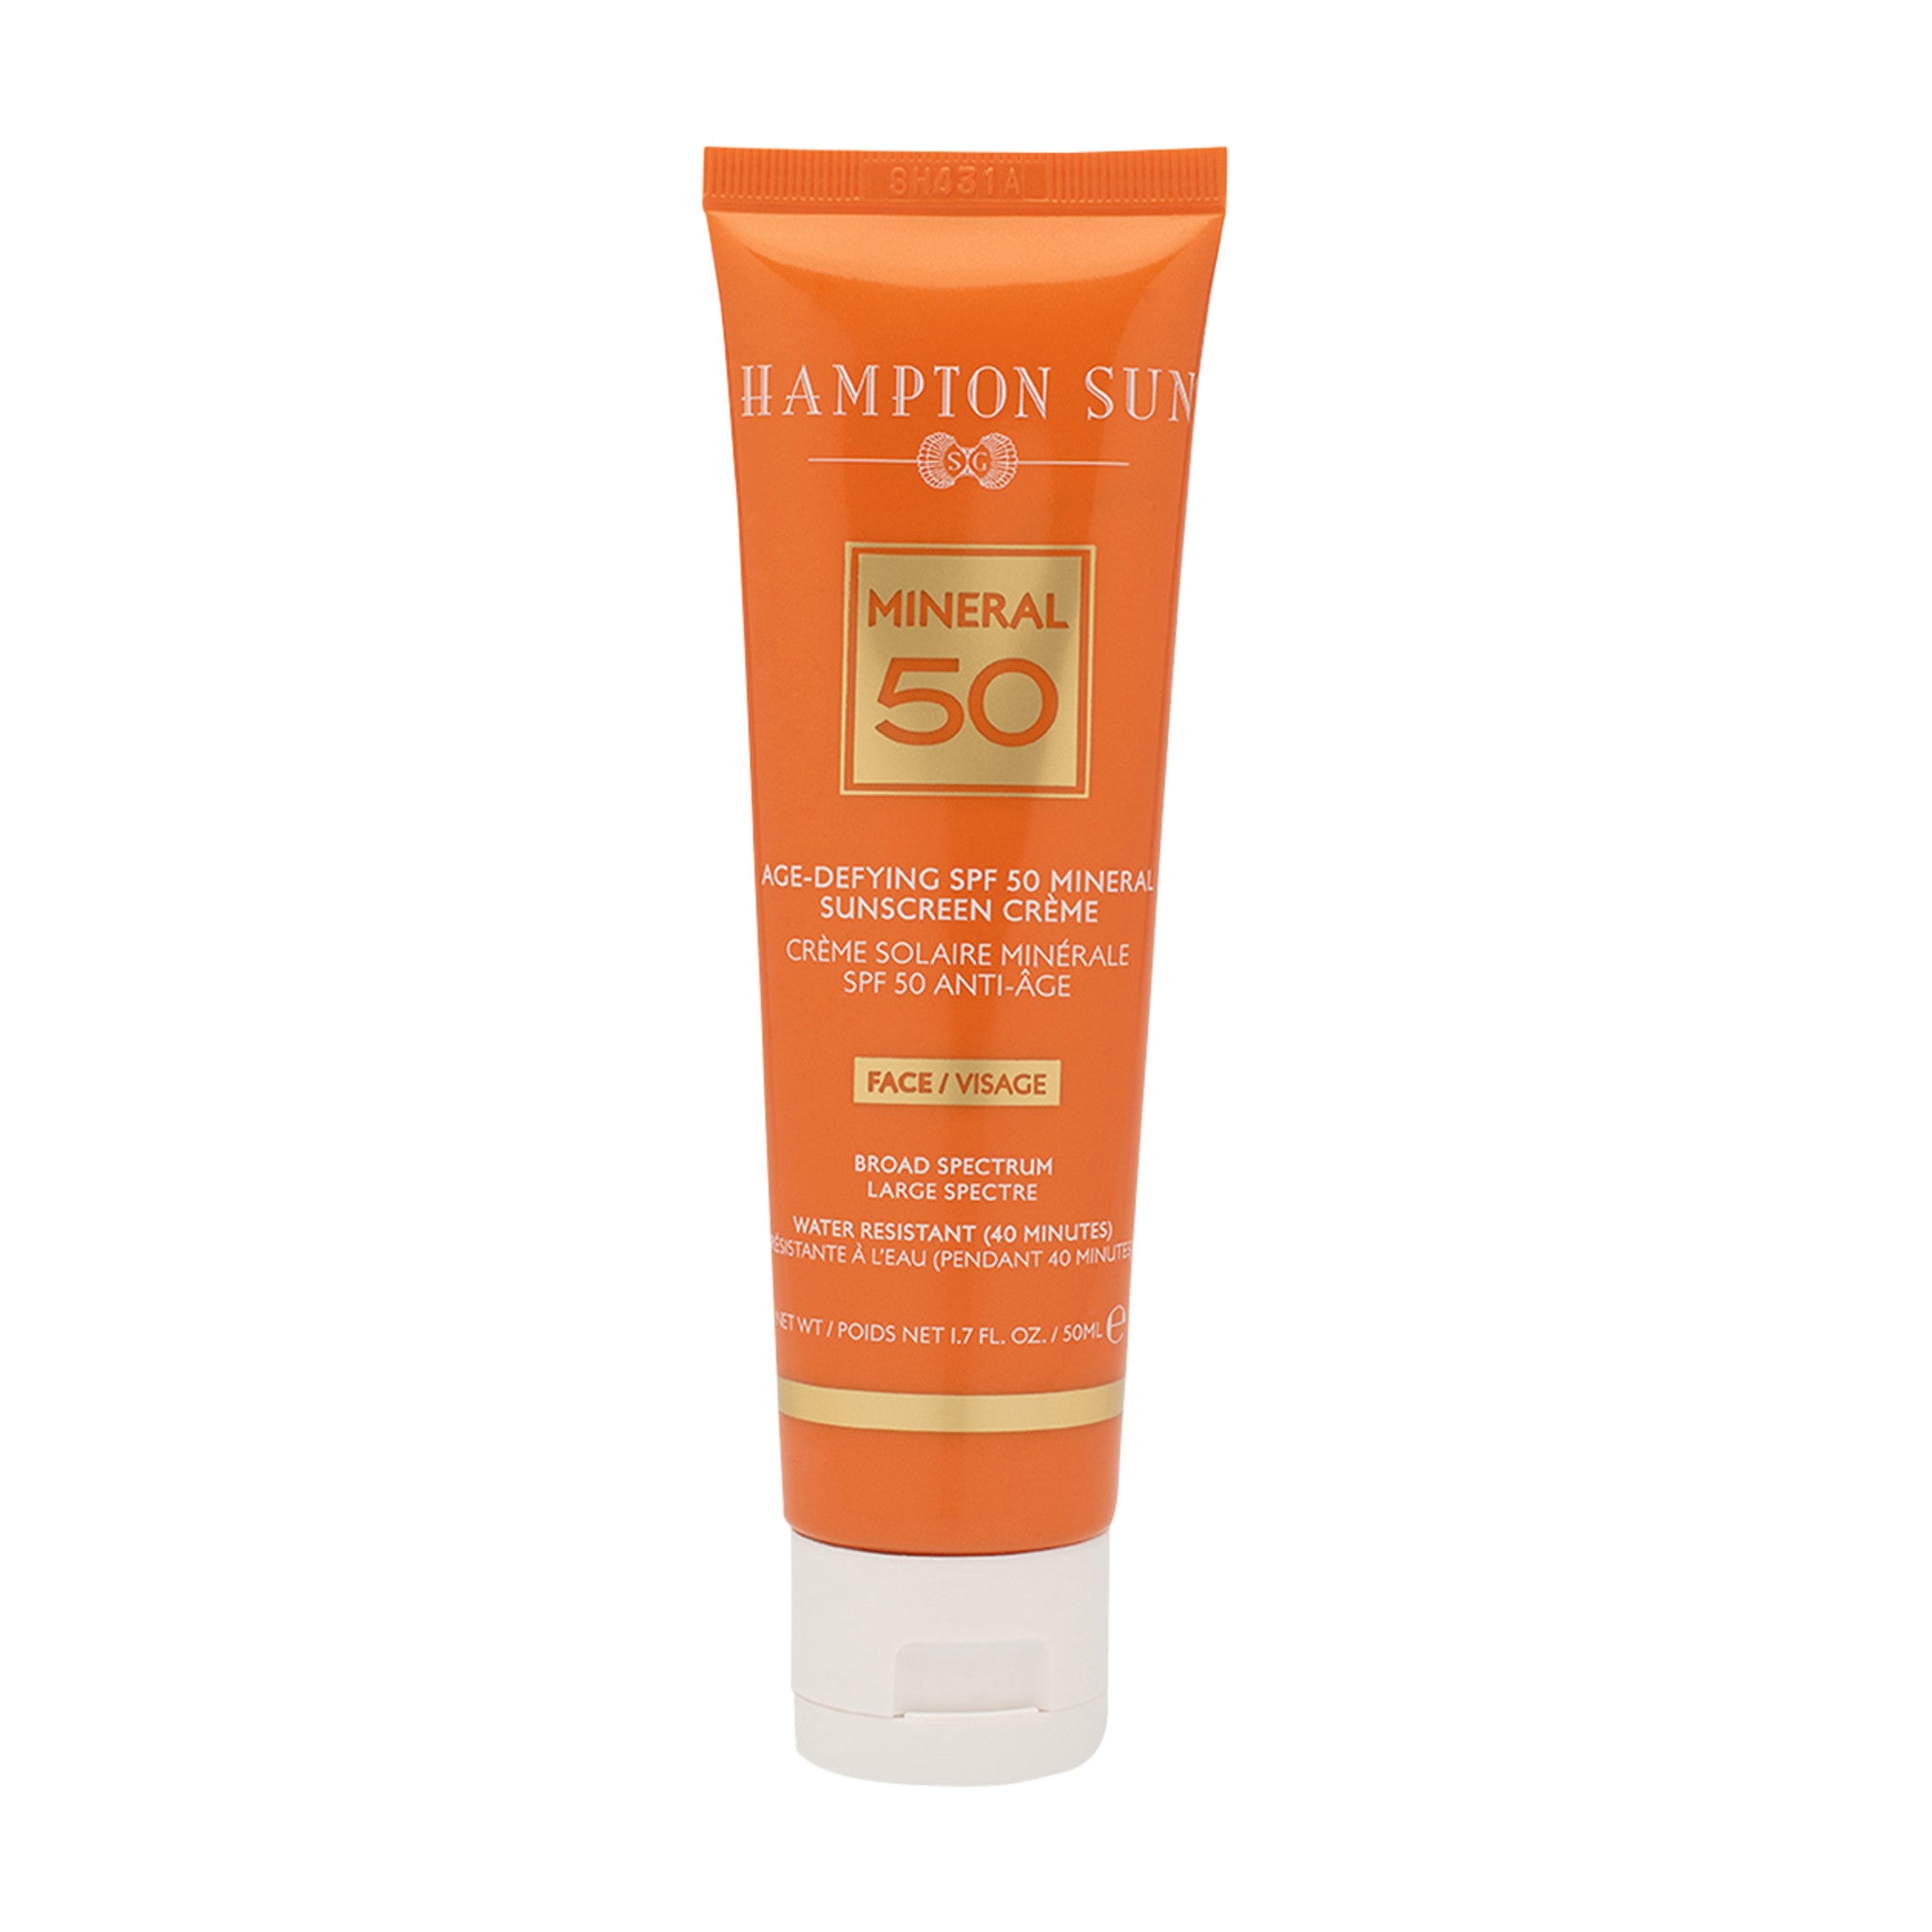 Mineral SPF For Face main image.